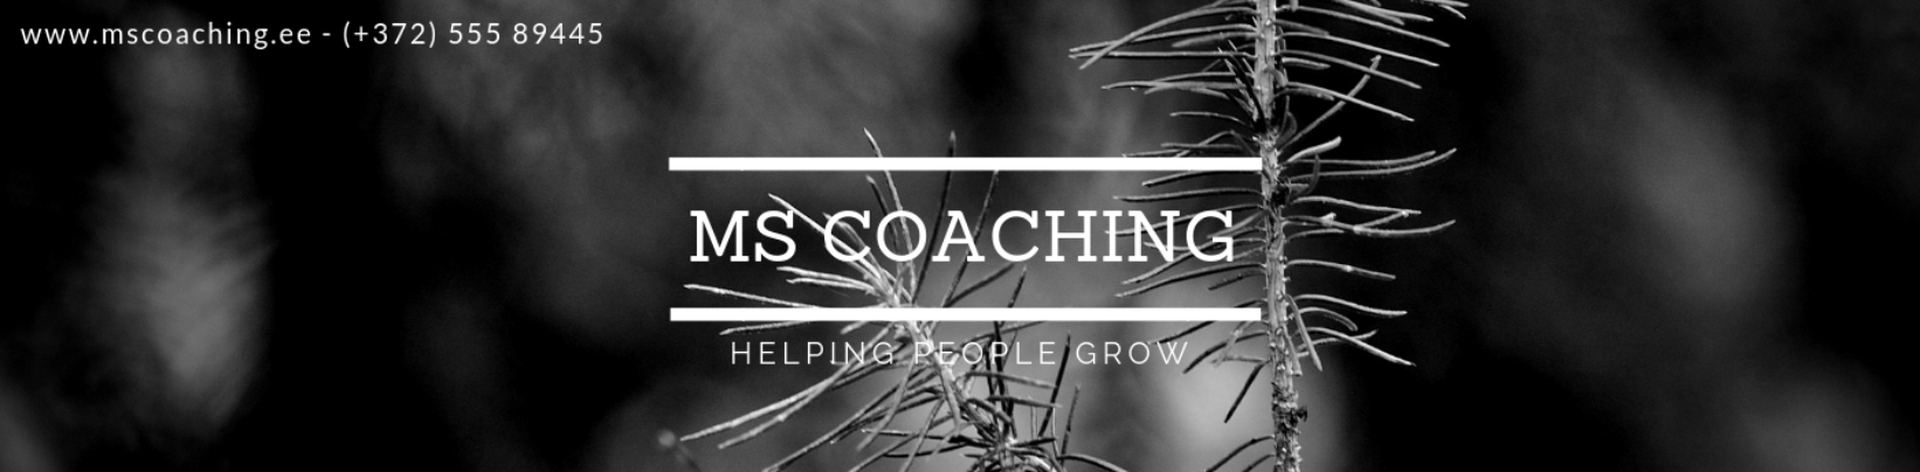 Coaching, Project Management Training, project management, leadership training, Career coaching